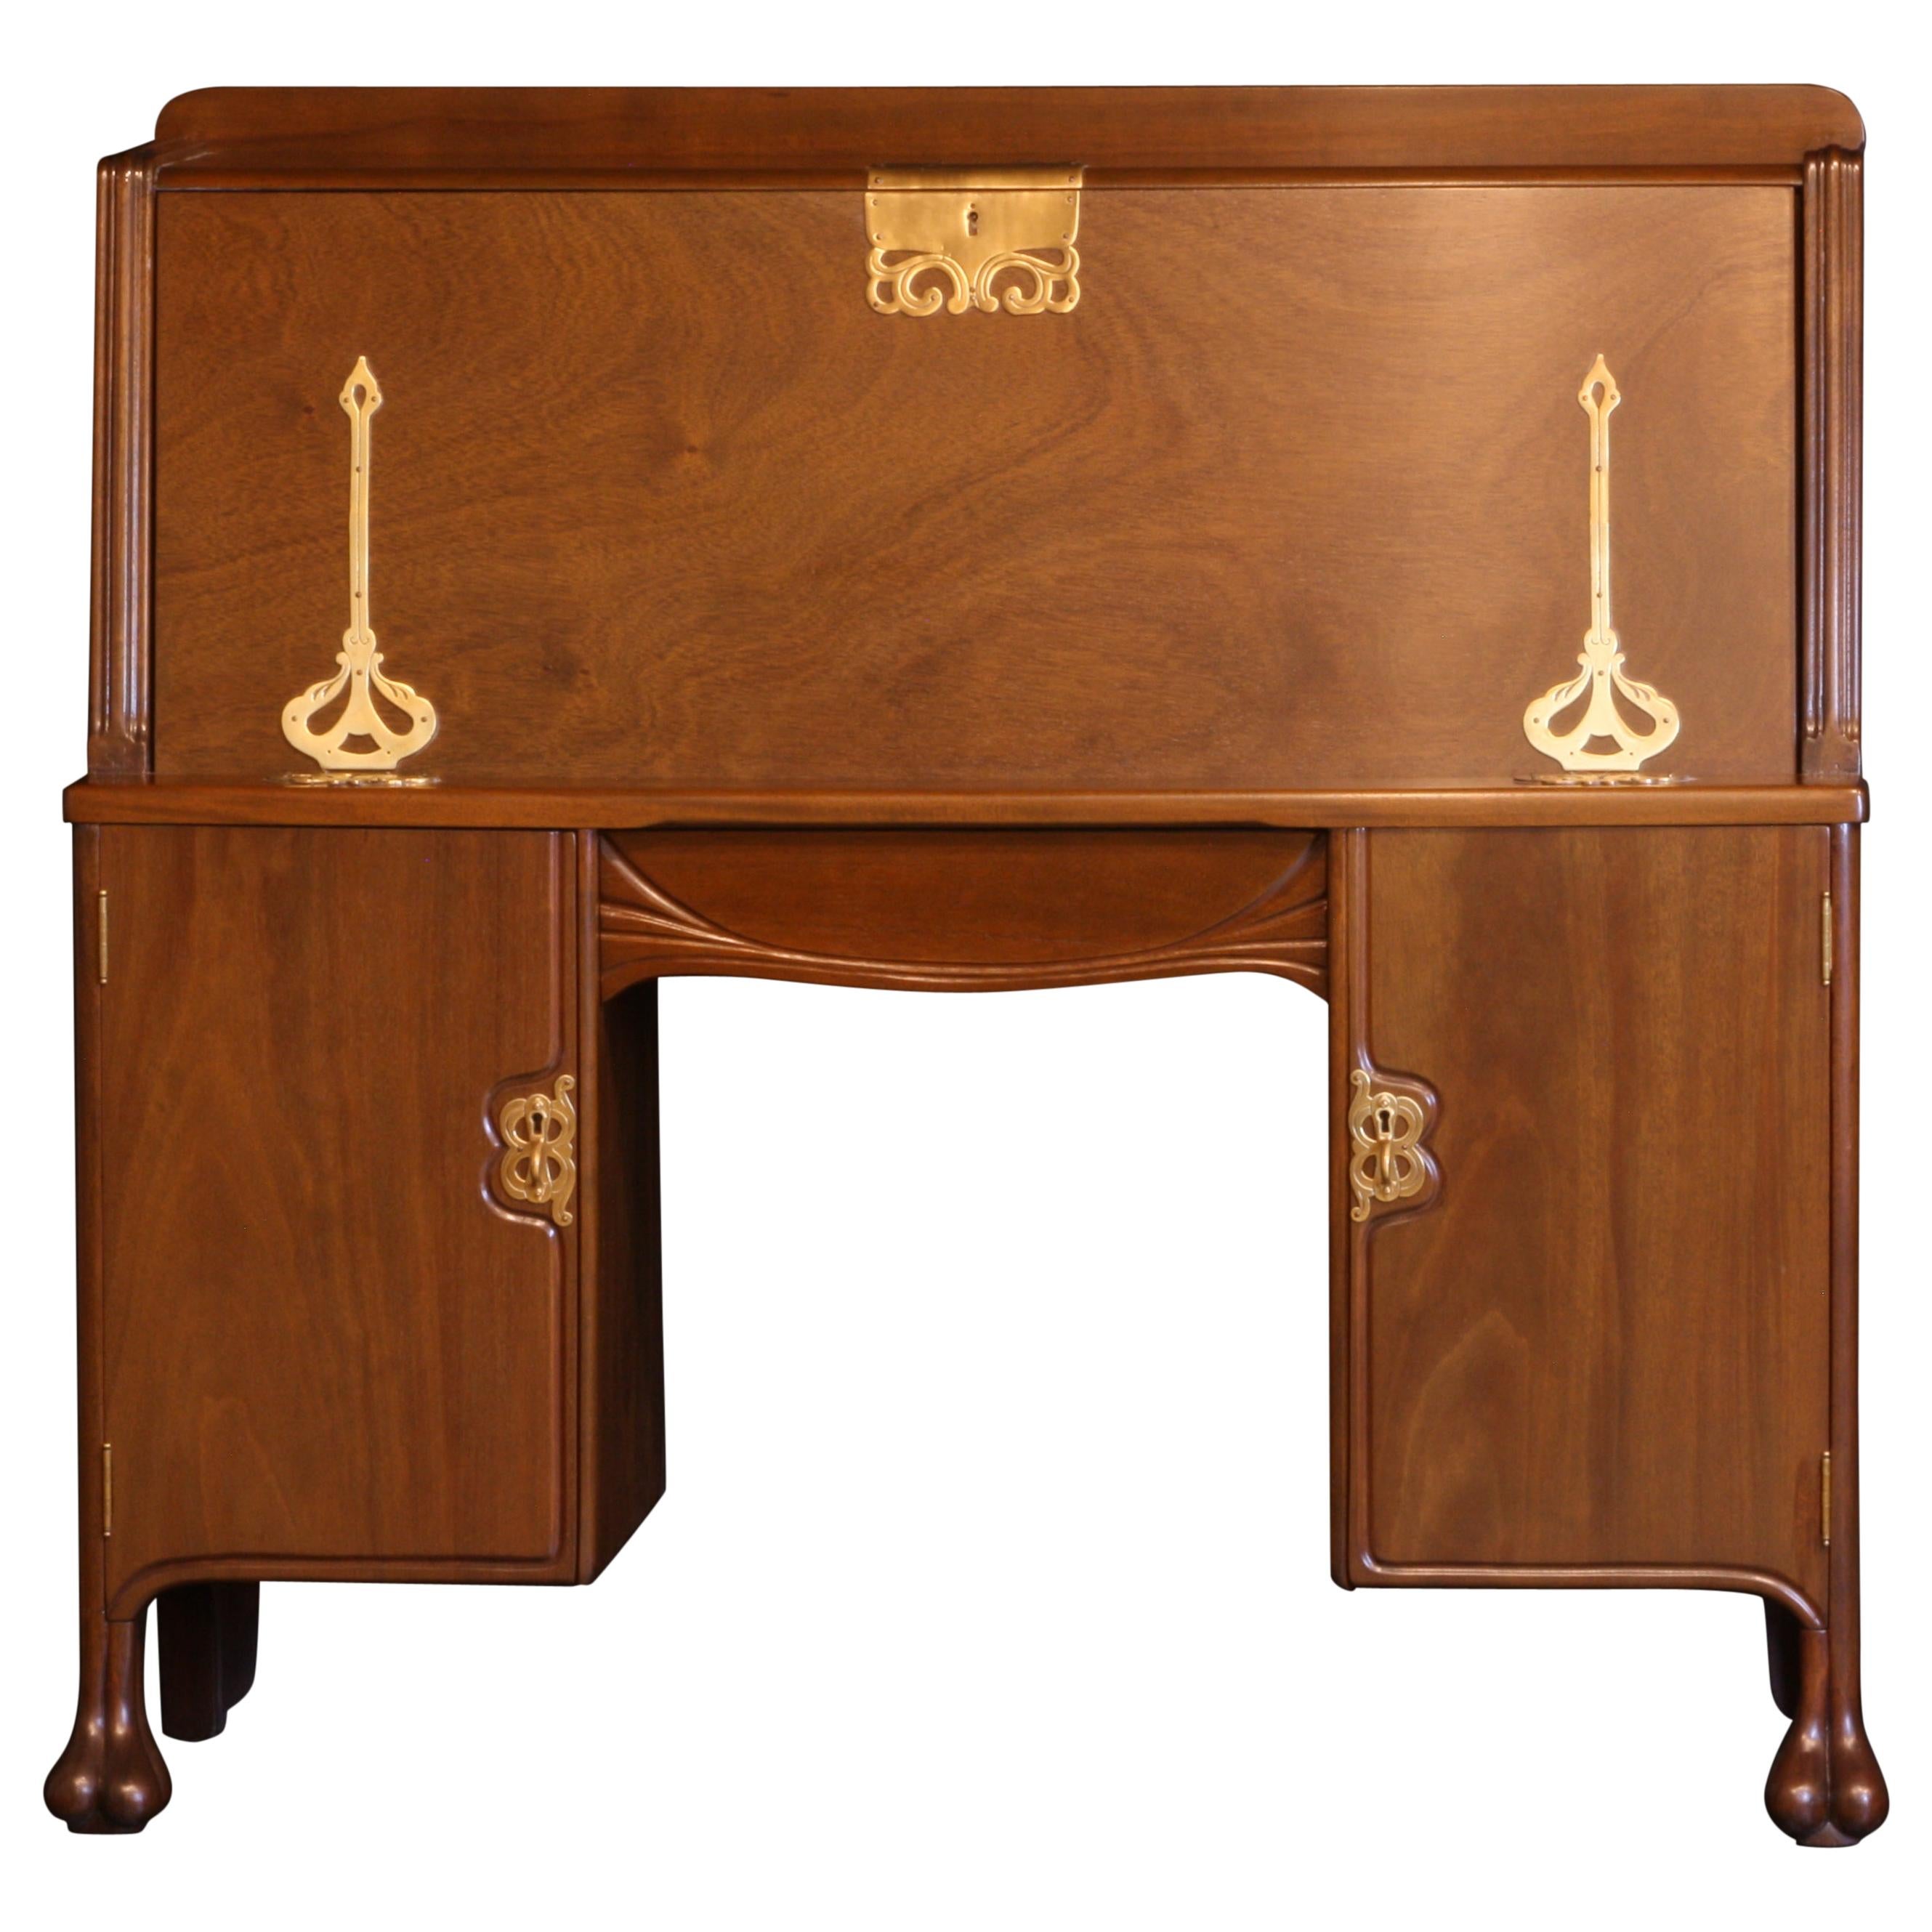 Desk Walnut Art Nouveau with Brass Fittings, Fitted Interior, with Brass Accents